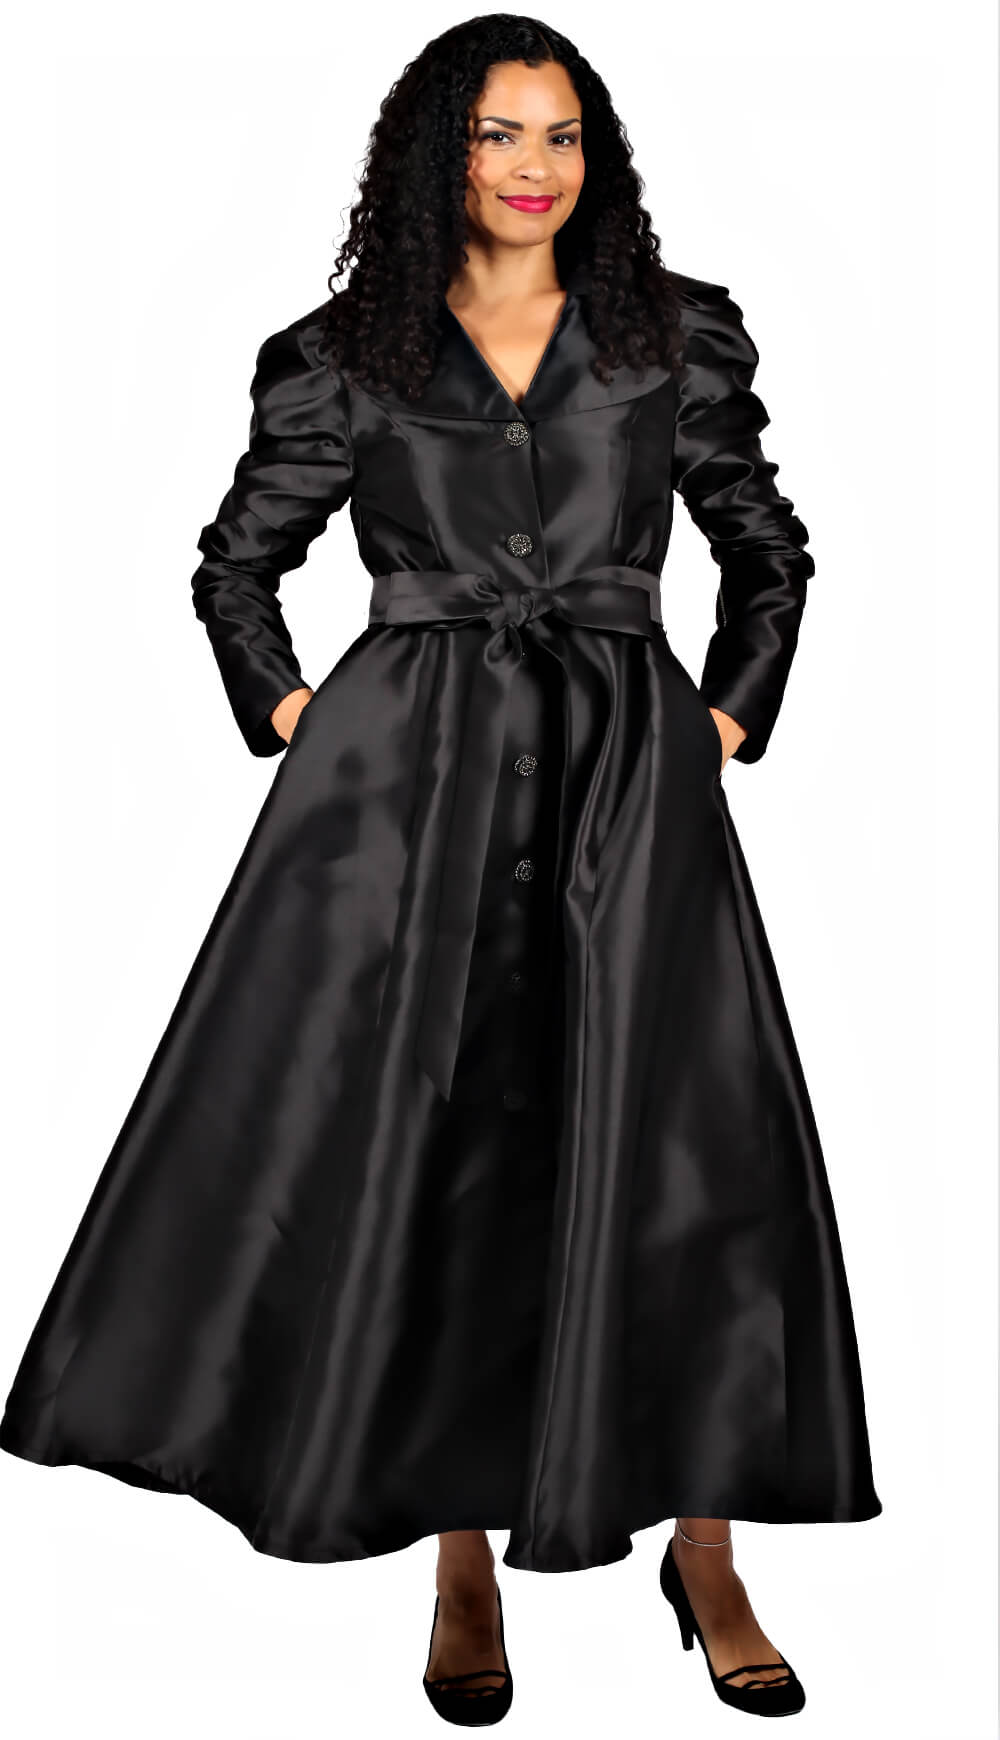 Diana Couture Church Dress 8743C-Black - Church Suits For Less